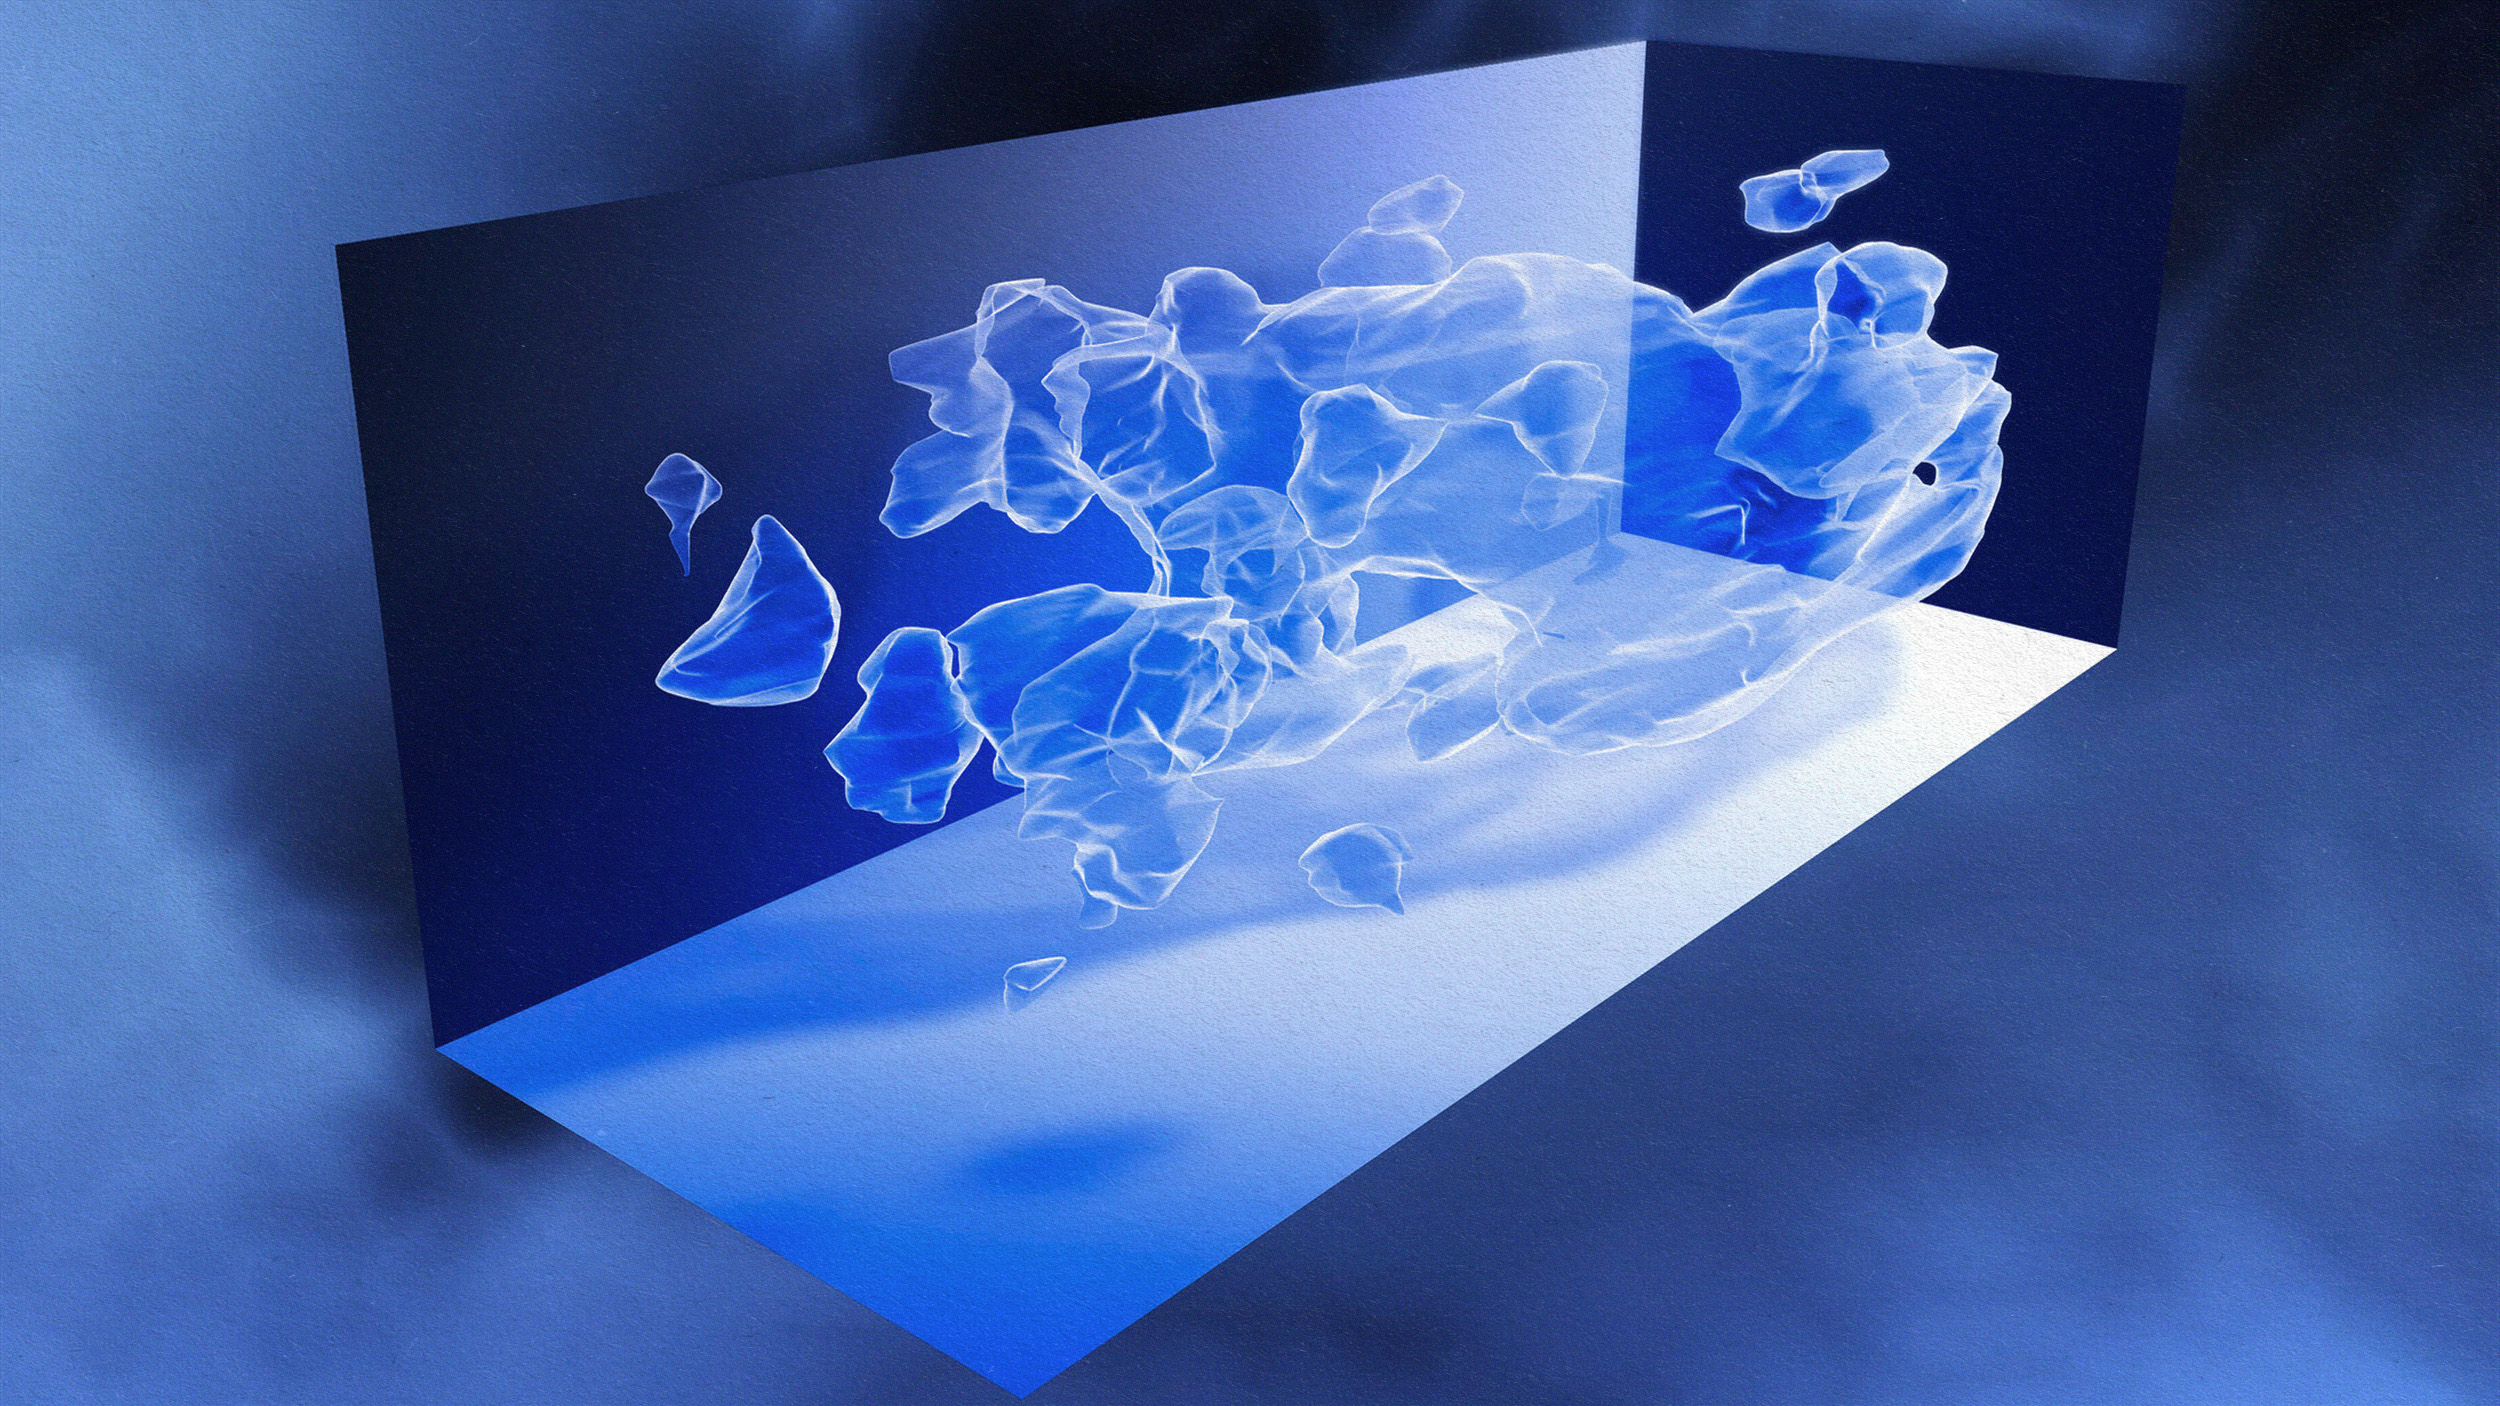 An image of a blue object in a blue box depicting axions.